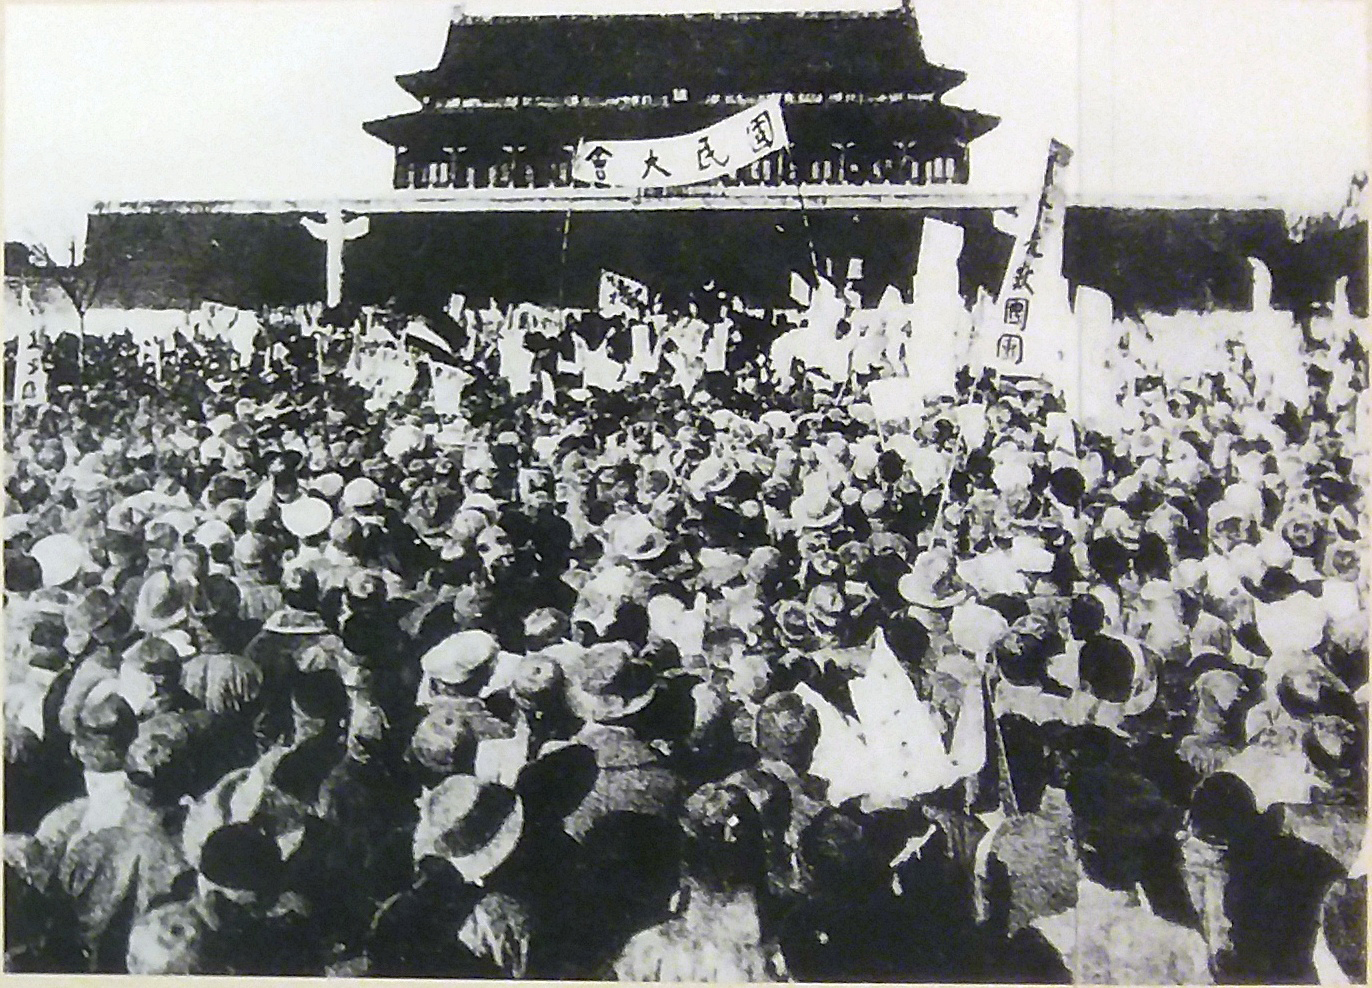 Tiananmen Square on 4 May 1919. Around 3,000 students from 13 universities in Beijing gathered there to oppose Article 156 of the Treaty of Versailles which handover a German possession in China to Japan (Shandong Problem). This officially sparked the May Fourth Movement (Hong Kong Central Library)